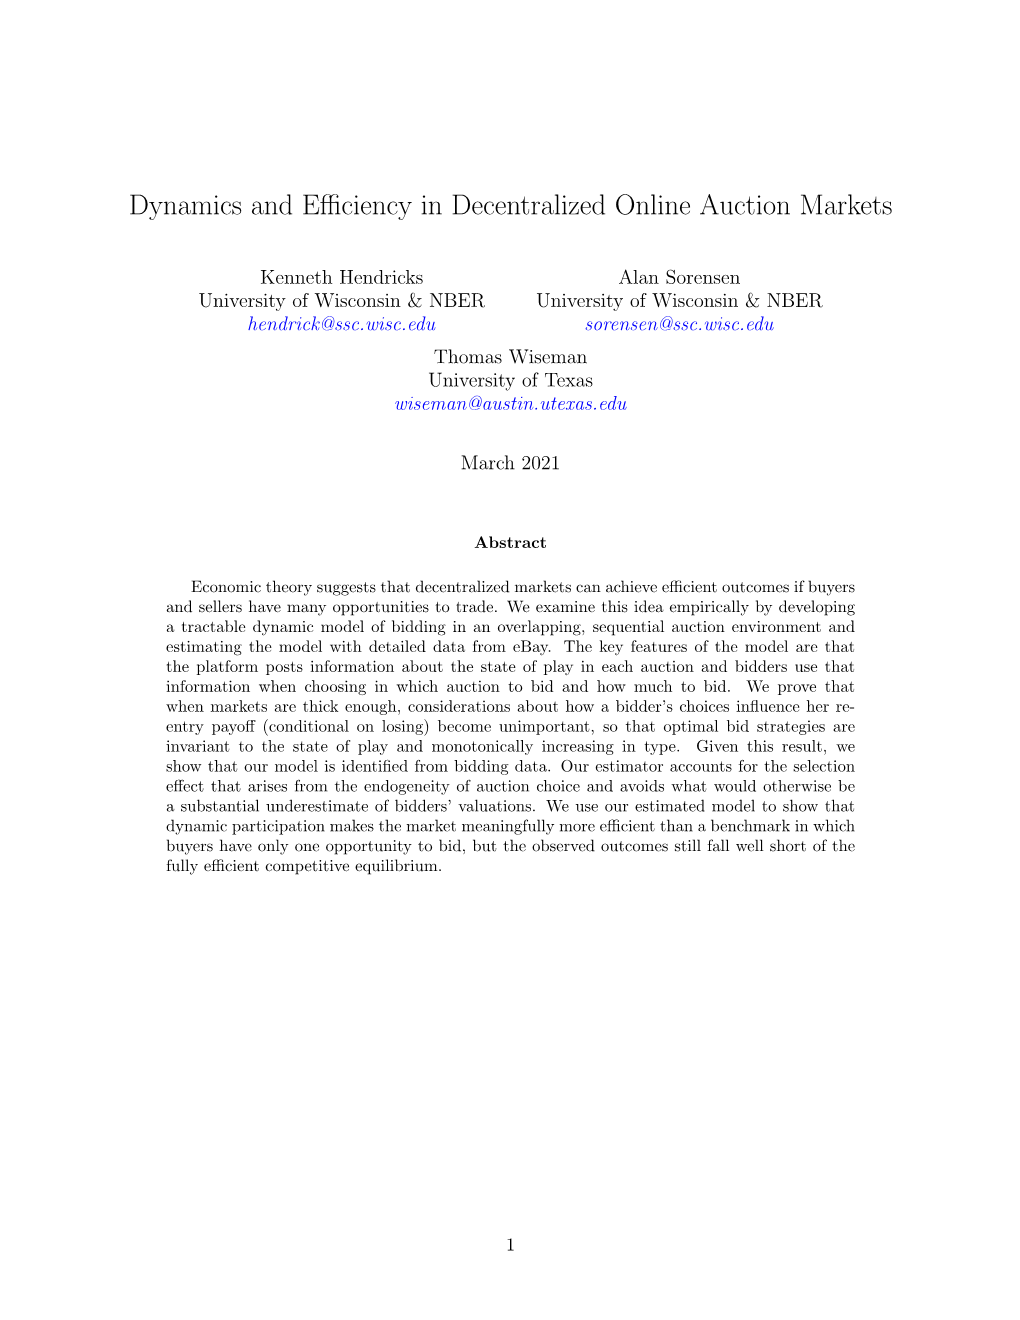 Dynamics and Efficiency in Decentralized Online Auction Markets